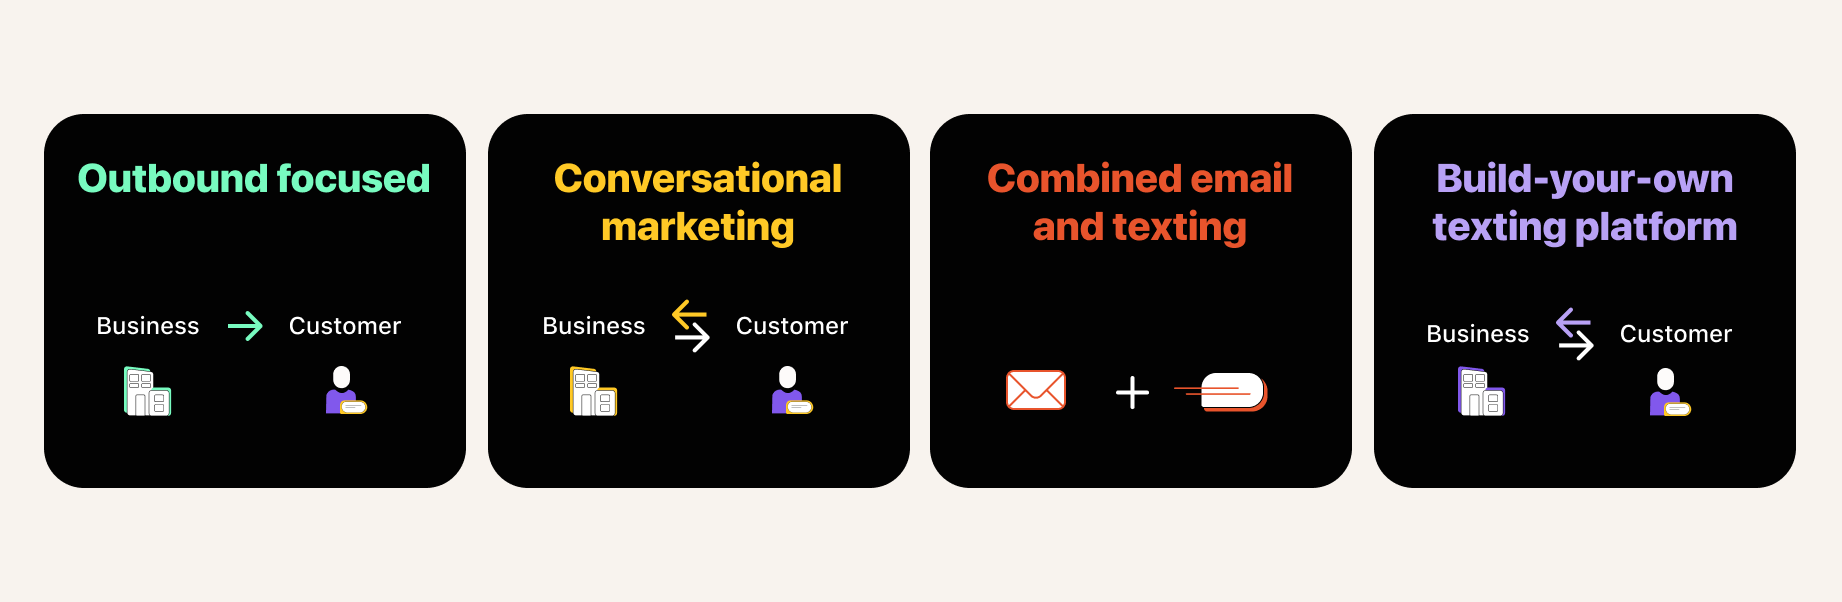 Graphic comparing types of text marketing platforms: outbound focused, conversational marketing, combined email and texting, and build-your-own texting platform